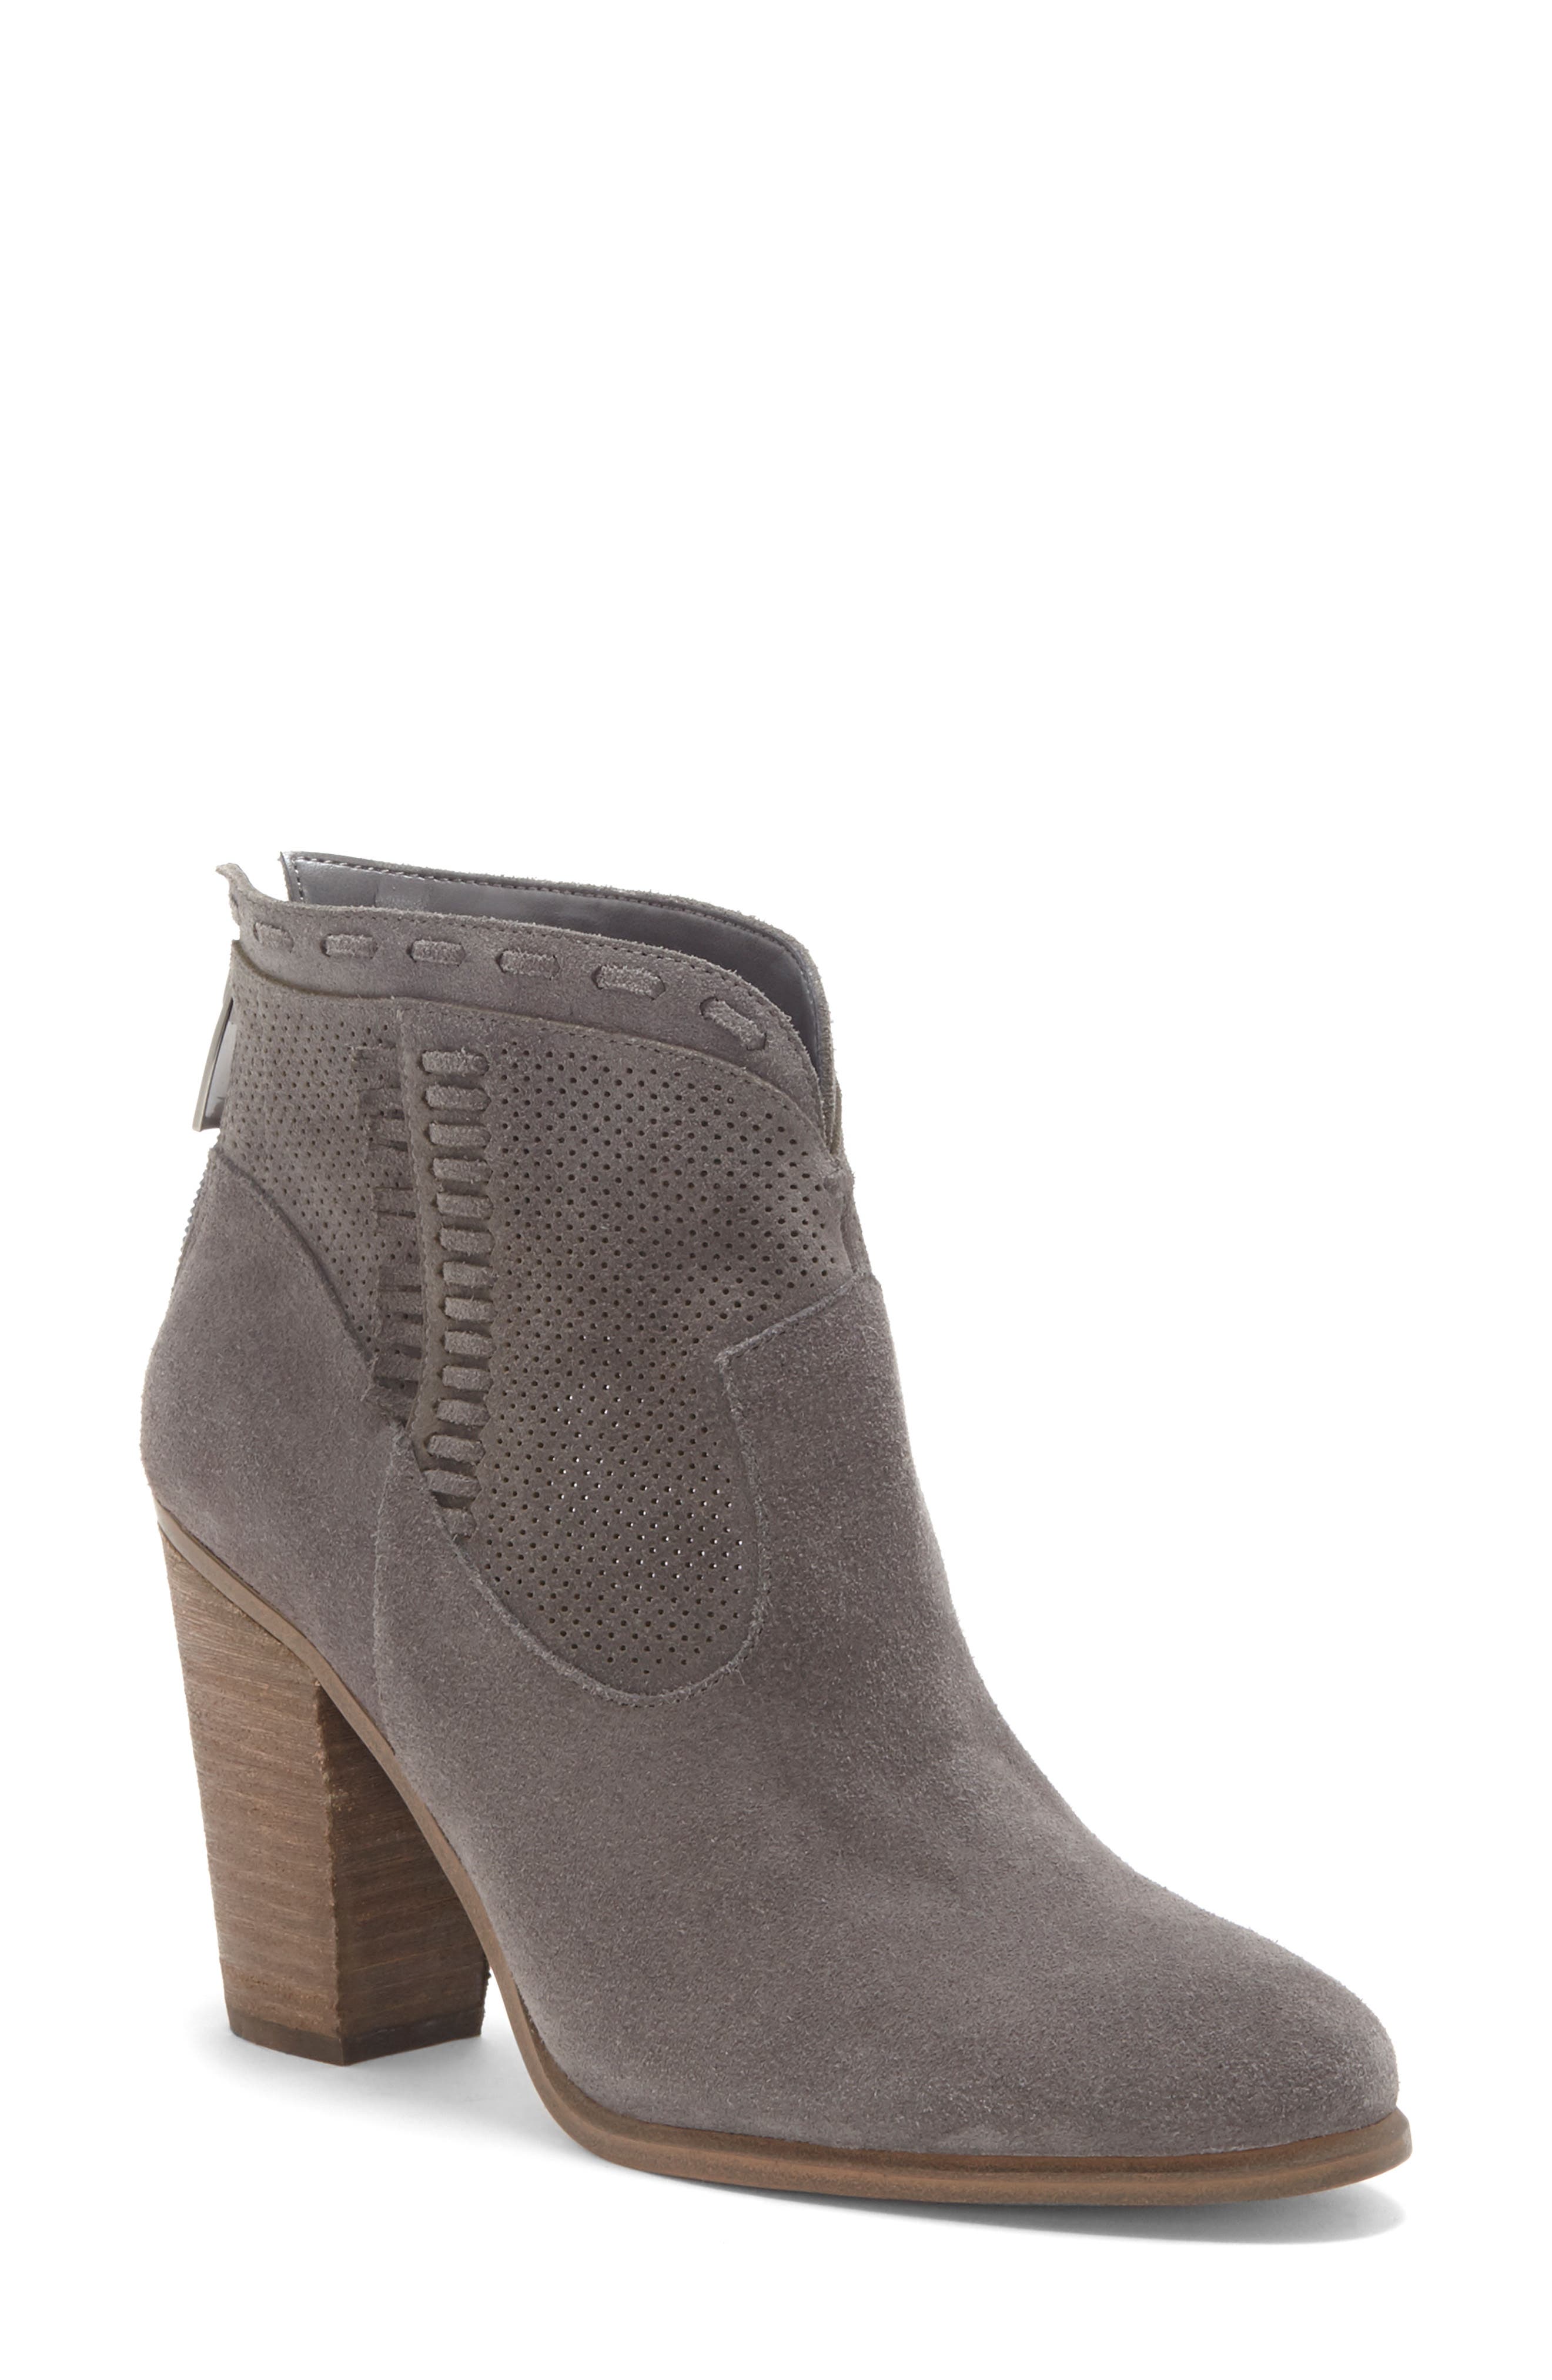 Vince Camuto | Fretzia Perforated Boot 